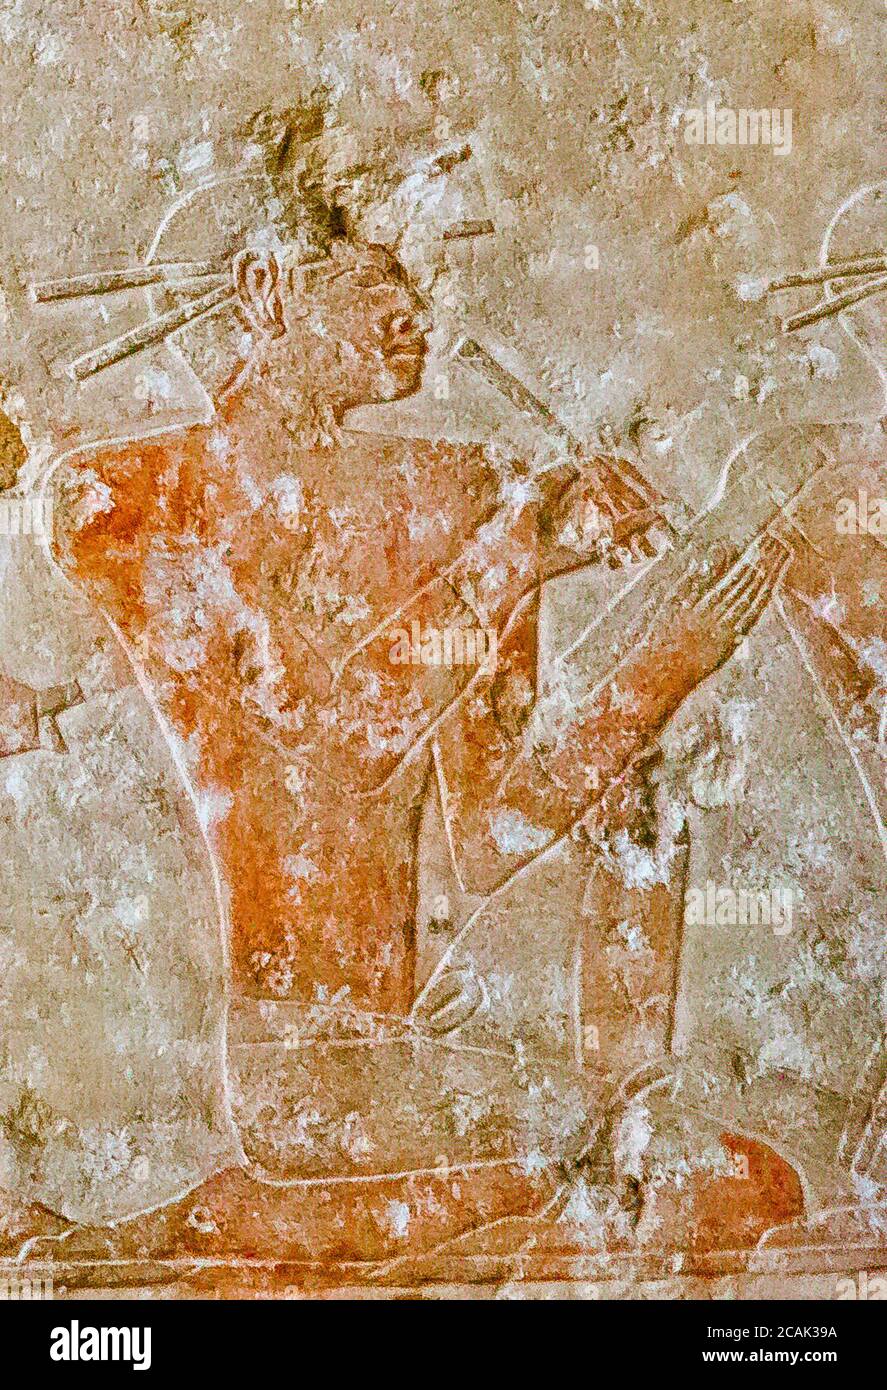 Egypt, Cairo, Egyptian Museum, from the tomb of Kaemrehu, Saqqara, detail of a big relief depicting agricultural scenes : A scribe. Stock Photo